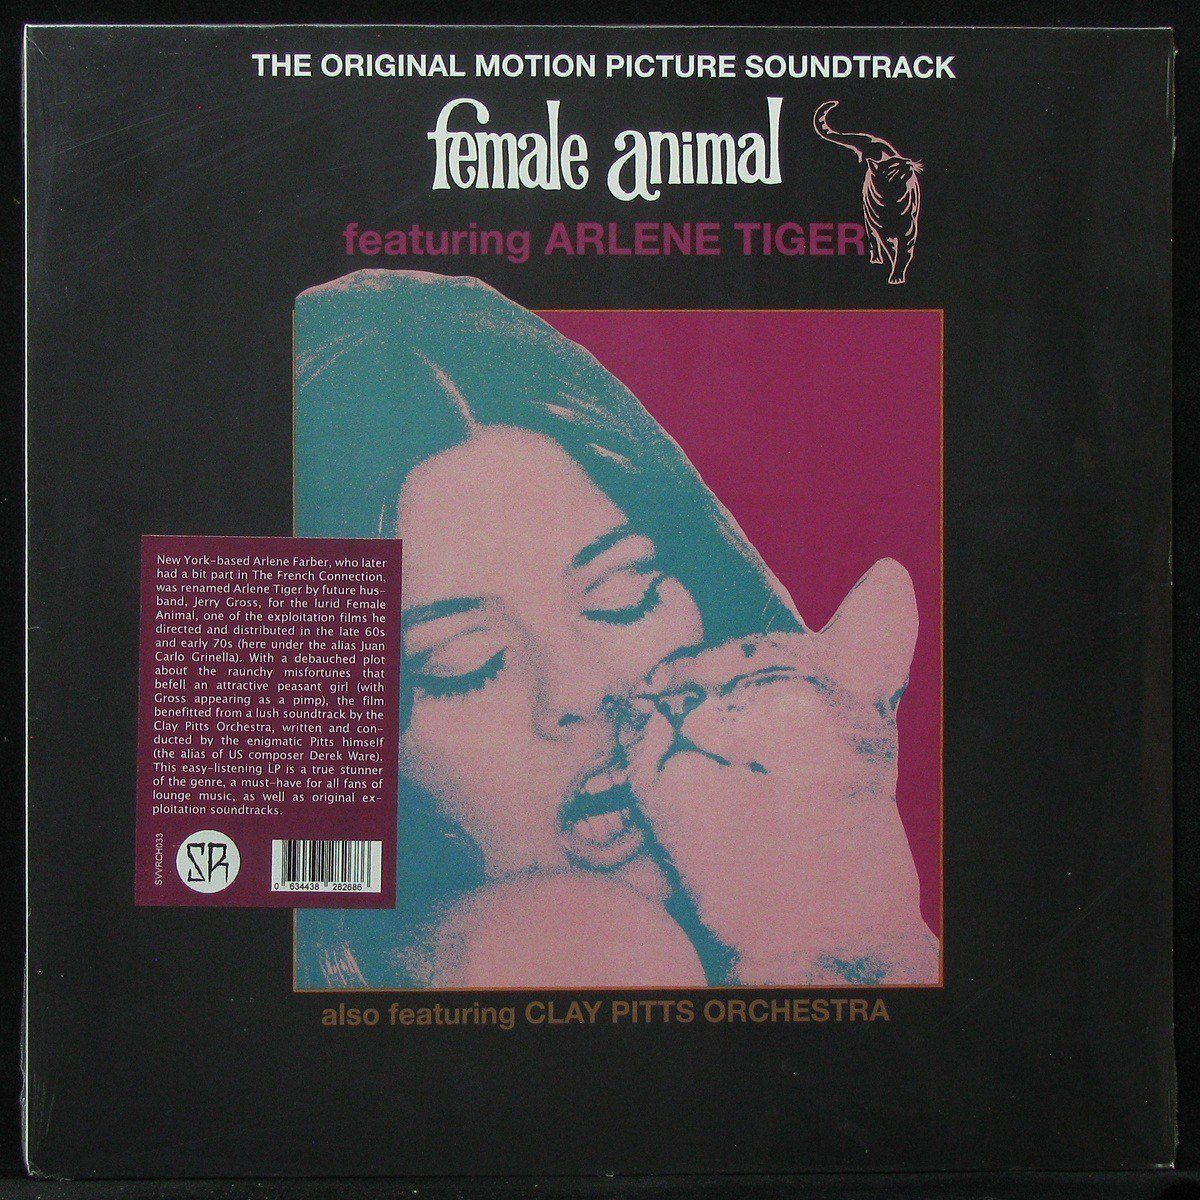 LP Arlene Tiger / Clay Pitts Orchestra — Female Animal (The Original Motion Picture Soundtrack) фото